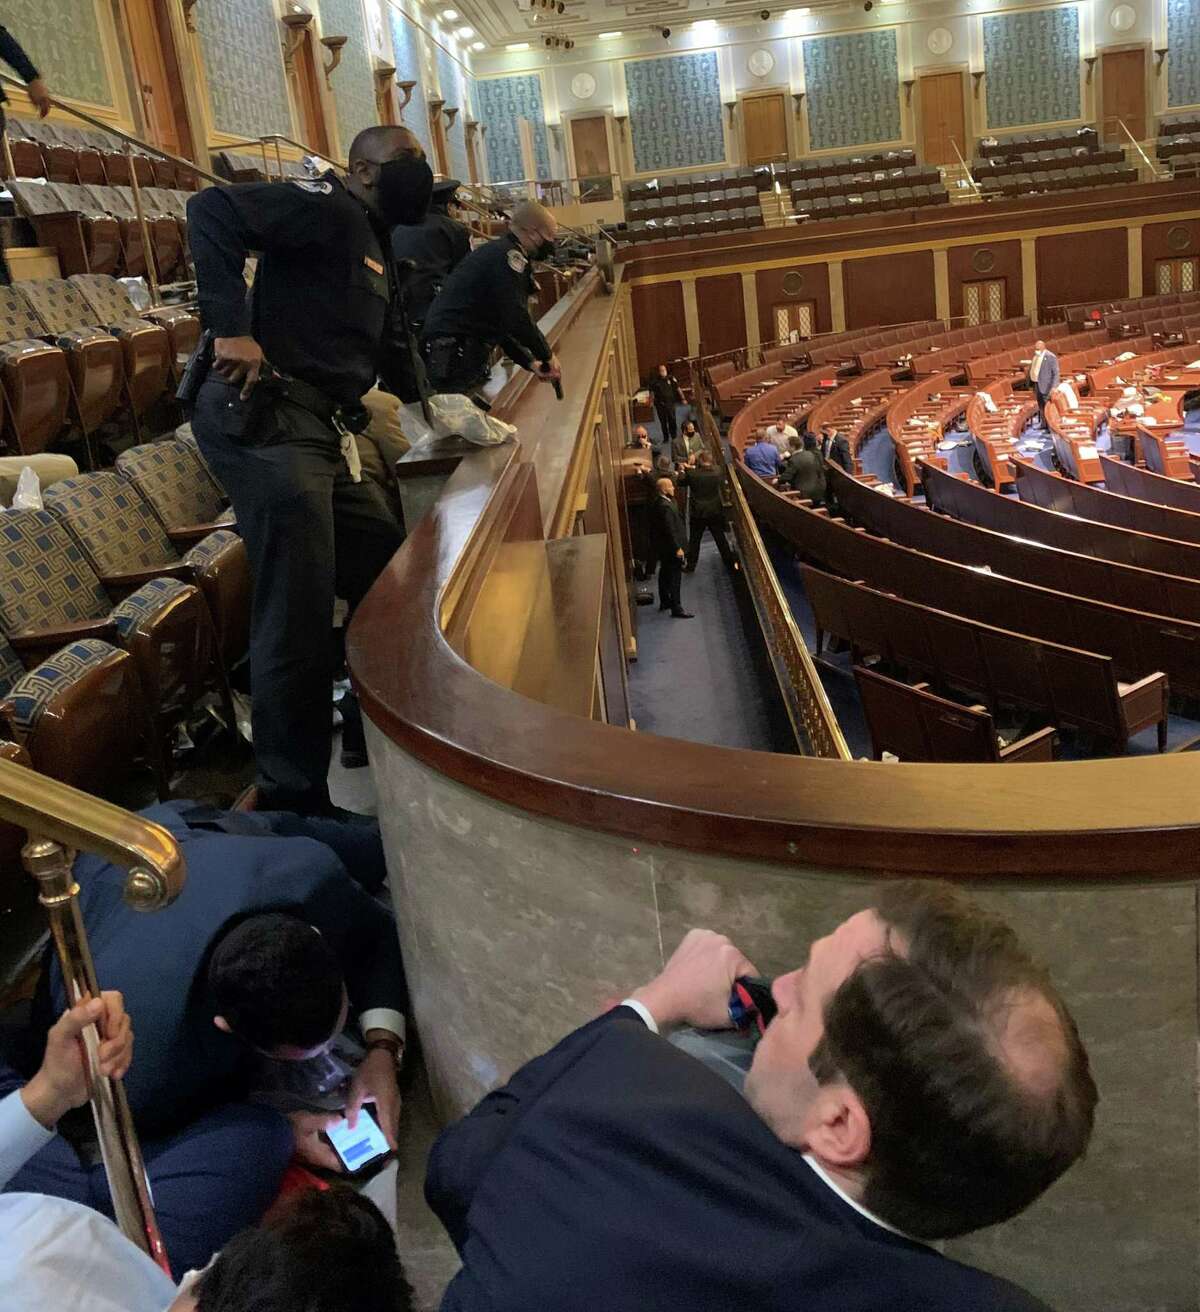 U.S. Rep. Jason Crow, at bottom, a Colorado Democrat, crouches under the rail of the gallery in the U.S. House of Representatives chamber on Jan. 6, 2021.